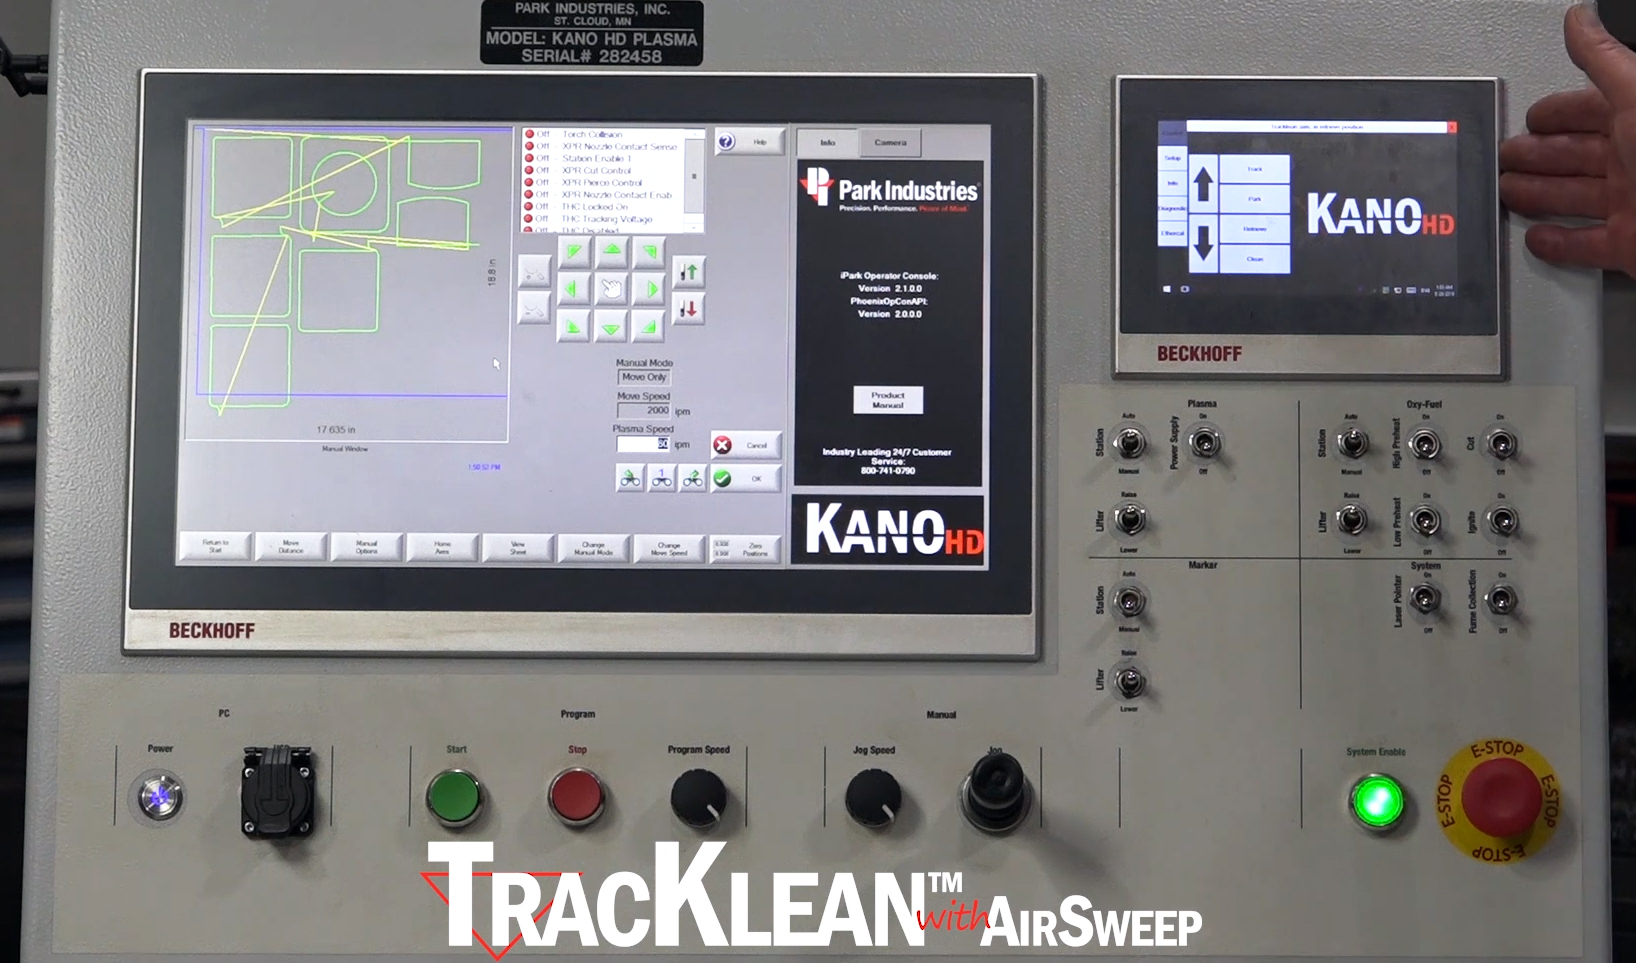 tacklean park industries self cleaning plasma cutting table controls